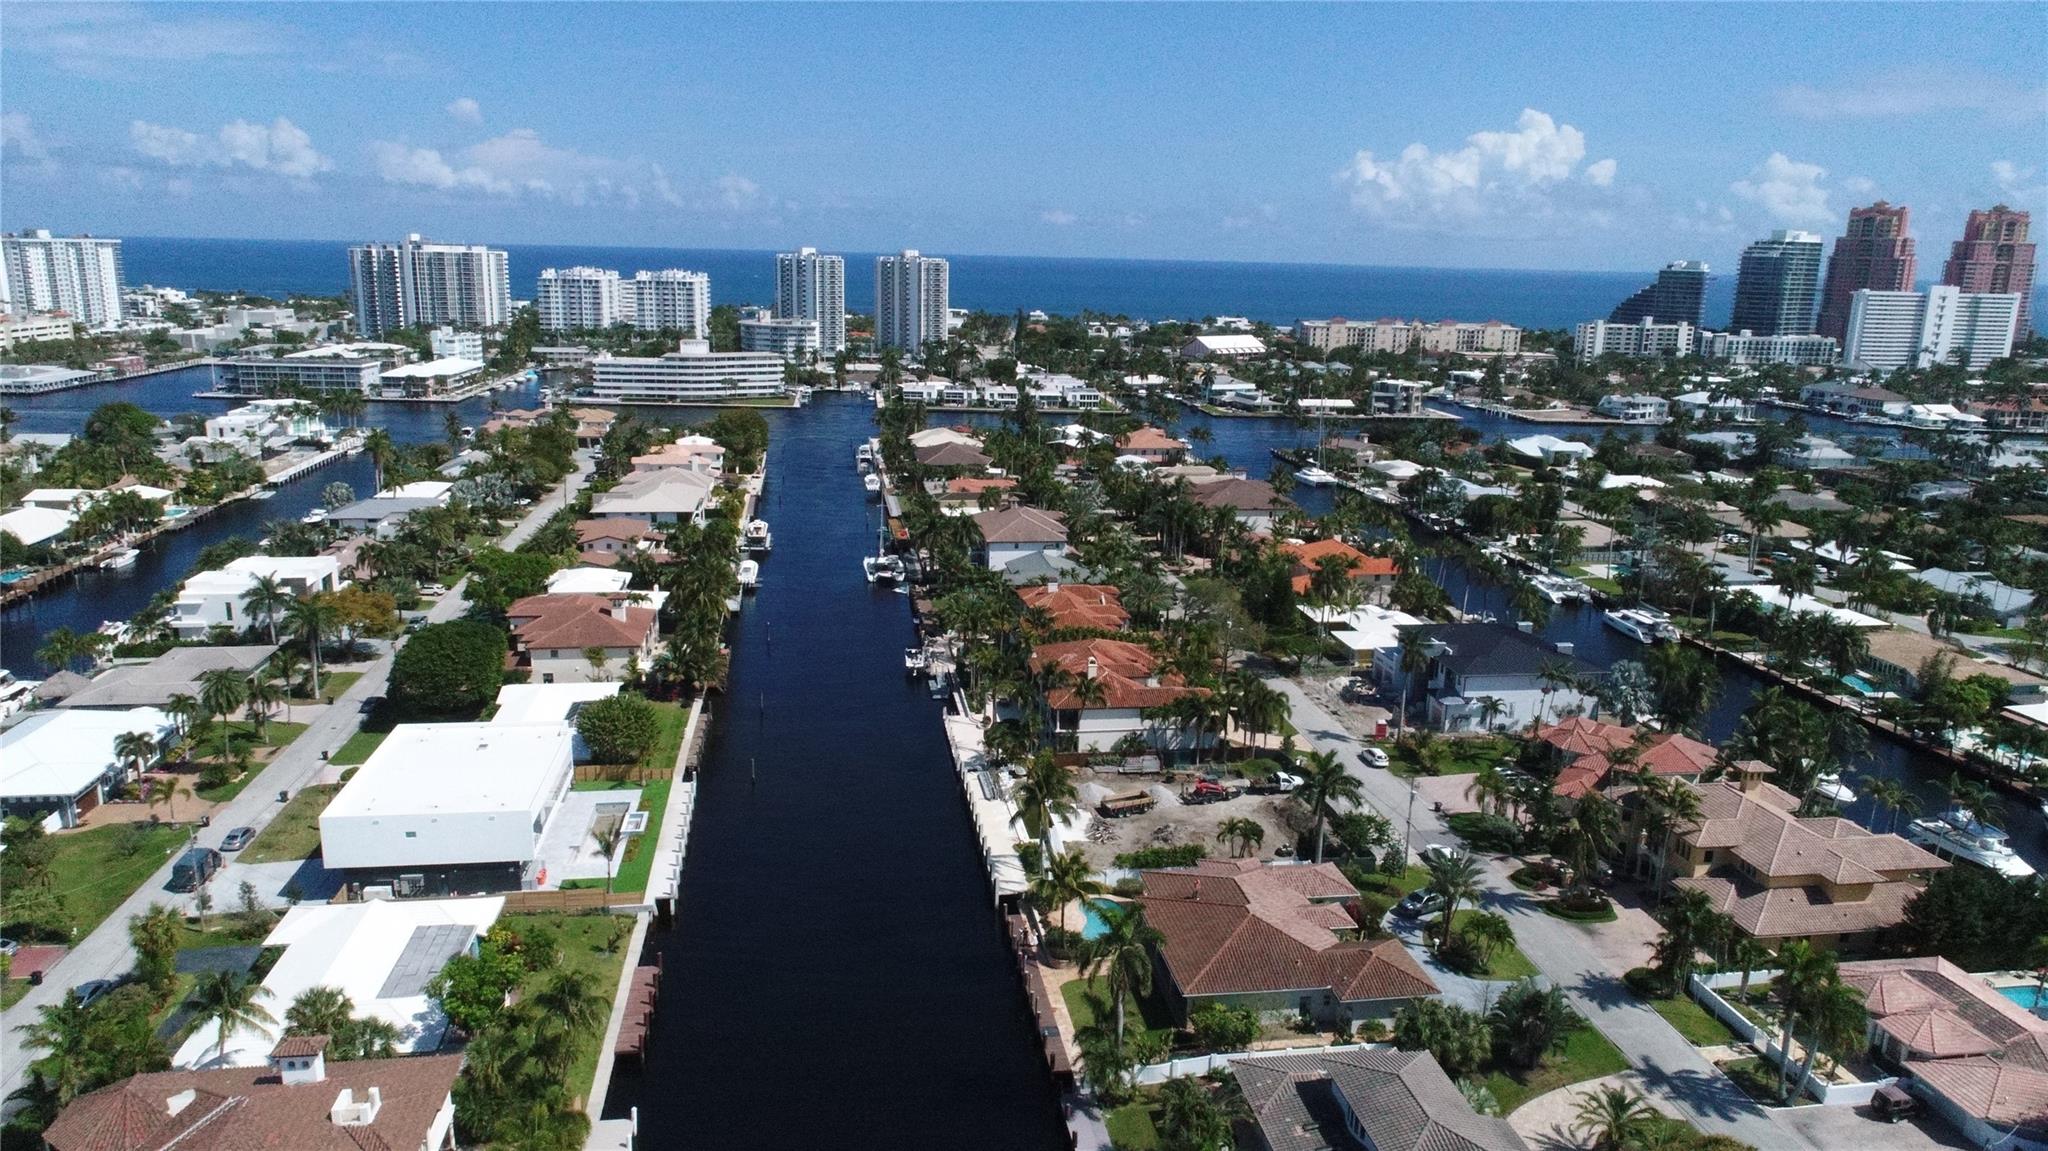 Building you a brand new 100 ft concrete dock with raised sea wall. Soaring ceilings with Impact windows & doors, open living space. 4 panel glass sliders 8 ft tall showcasing tranquil water views. Bayview A+ schools. This 3 brm, 3.5 bath home is on the best block of luxurious Coral Ridge deep water enclave with many new mansions around. This amazing 12,000 sf property has an outdoor bar and grill lounge area by the pool to enjoy Florida lifestyle on water. Large yacht home with easy Intracoastal access. Beautiful simulated wood tile floors throughout with built in electric outlets. Split bedrooms opening to outside oasis, auto shades. Wood built out closets. New picturesque tropical landscaping. 2 car garage, circular driveway, generator. Fast closing and move-in ready.
Don't miss this. Deep water 100' 2019 open concept floor plan home. Natural wood kitchen with large island, and built-in appliances. Prestigious area of Fort Lauderdale Coral Ridge area south of Oakland Park Blvd. New Concrete Dock has approved plans that we are building. Wide canal with views of beautiful architecture homes across.